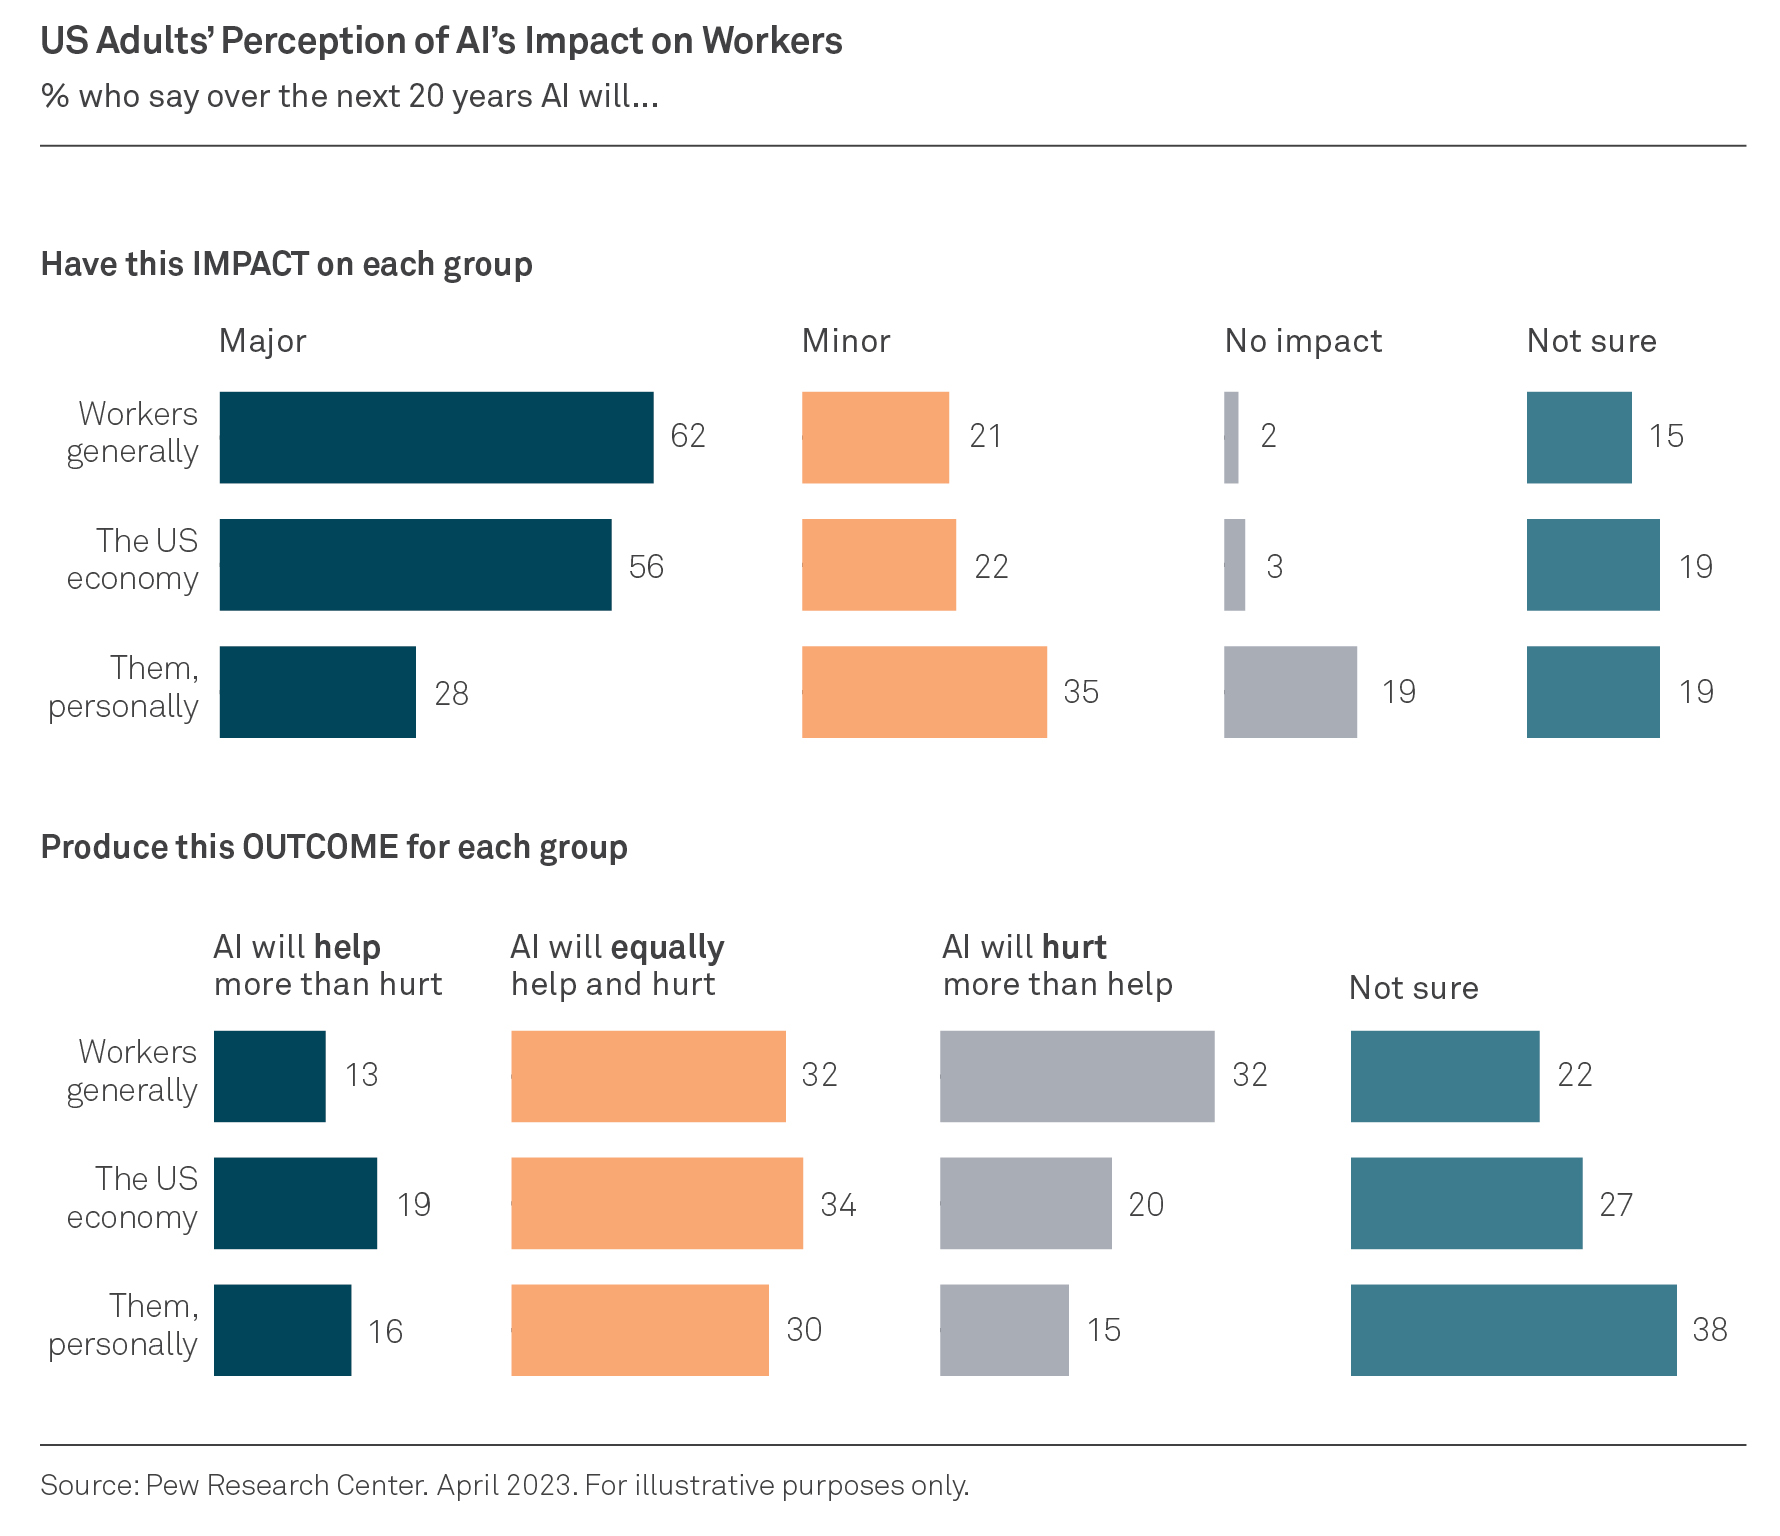 US adults’ perception of the impact of AI in
the workplace